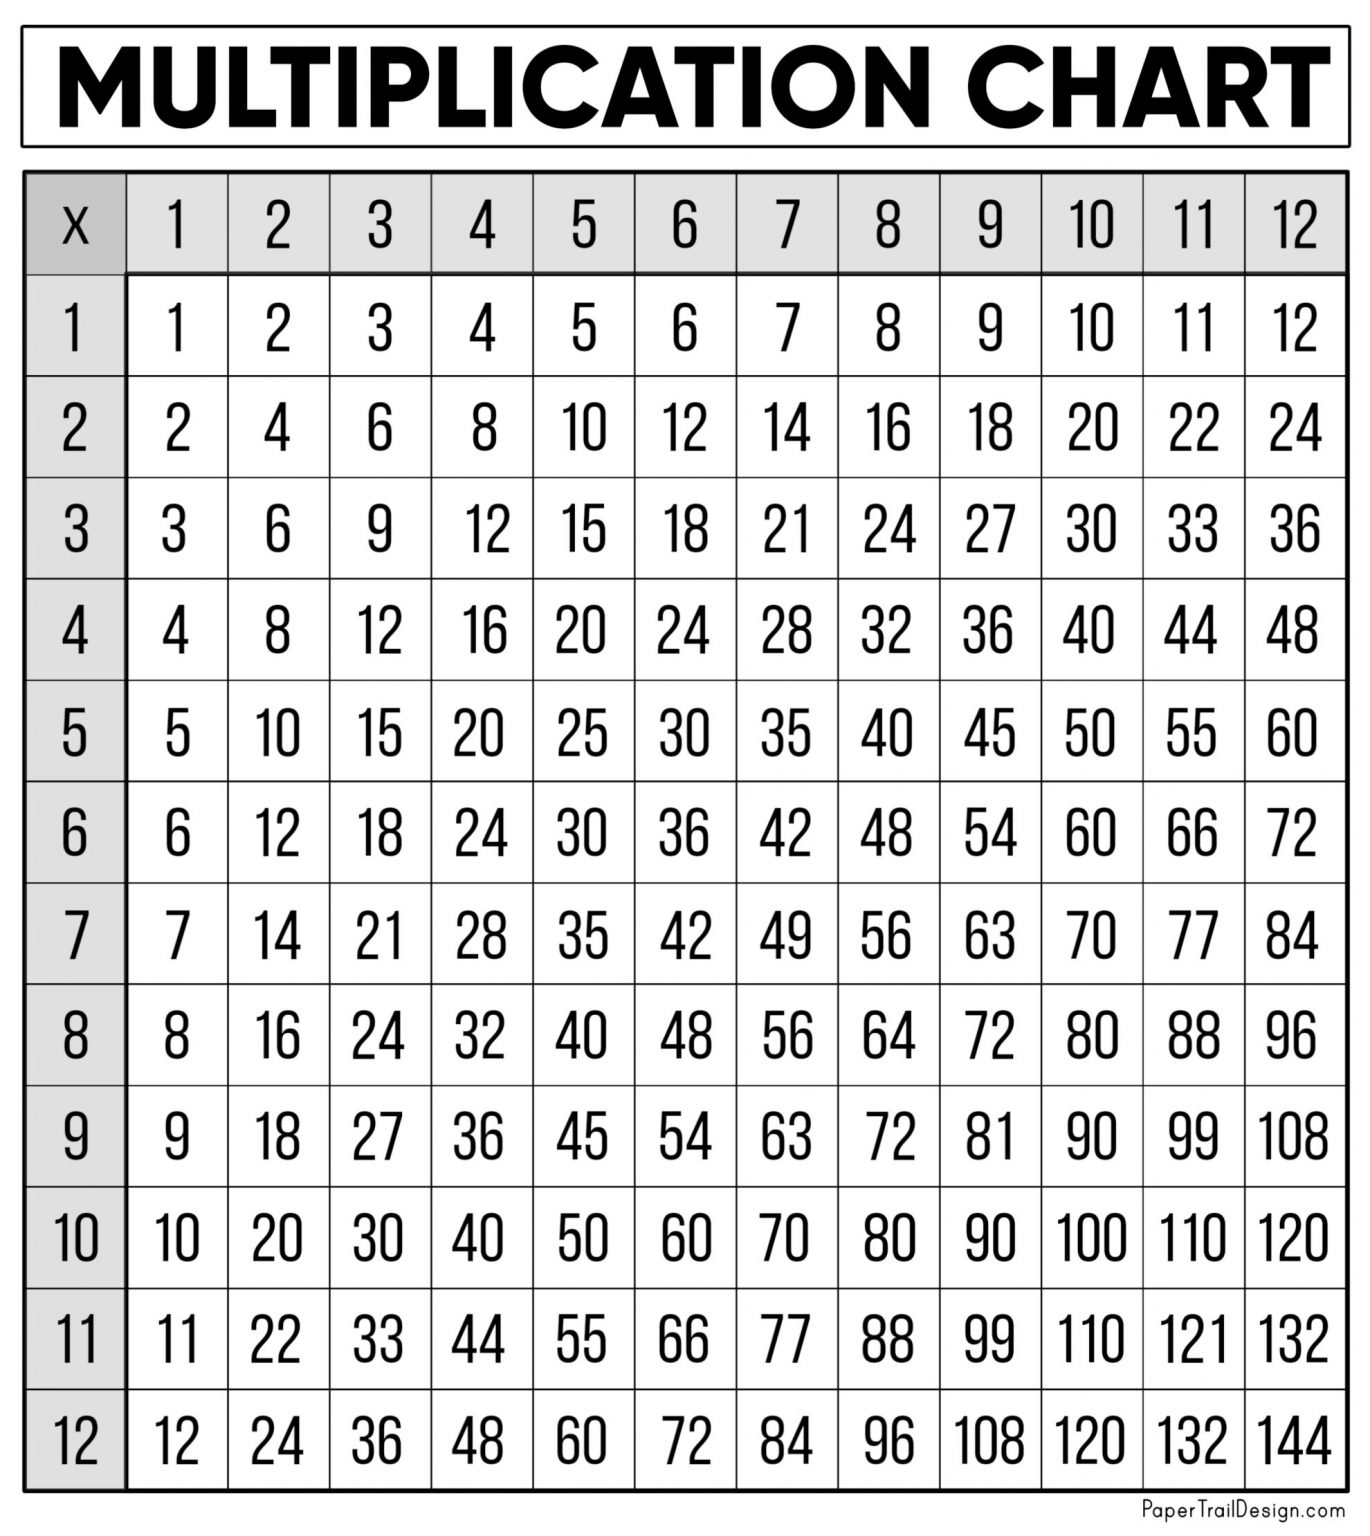 Free Multiplication Chart Printable - Paper Trail Design